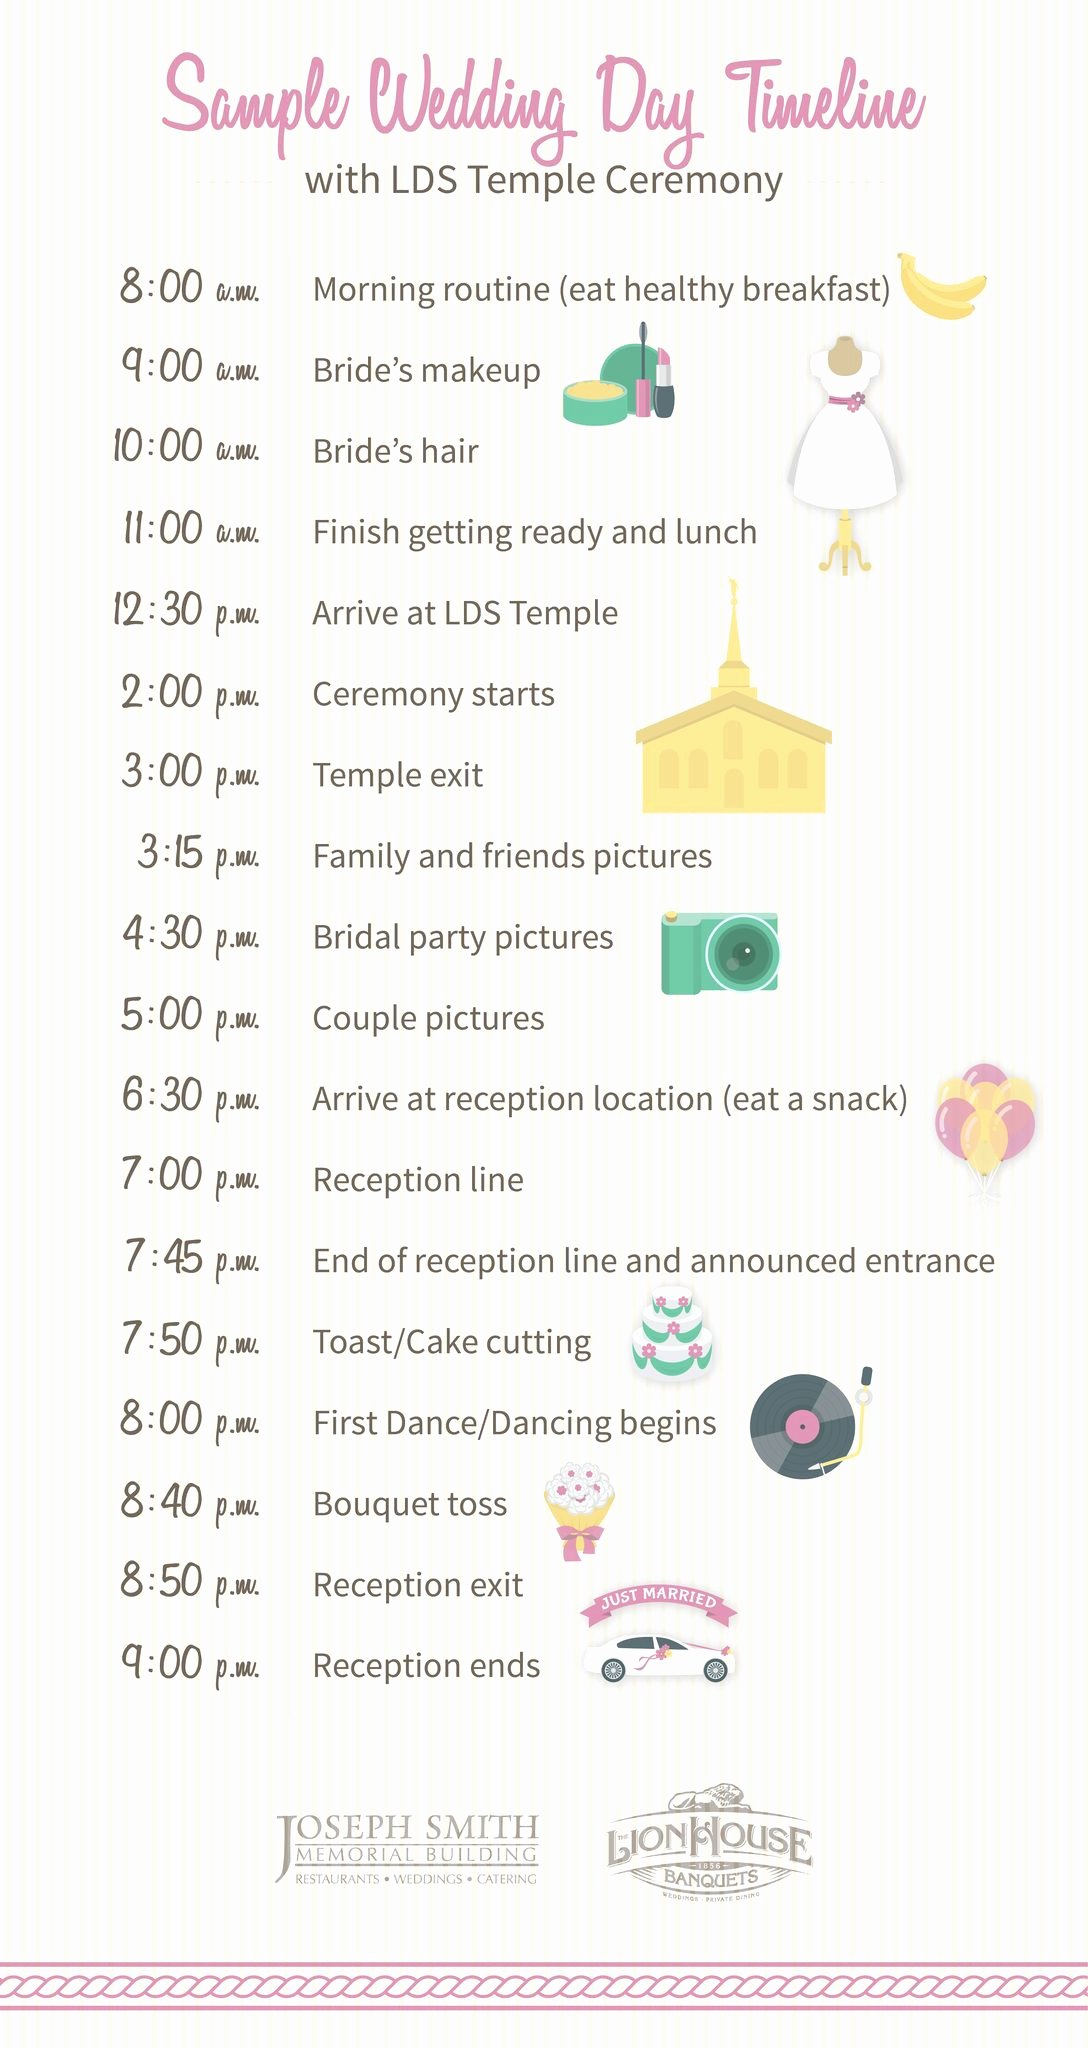 How to Build Your Wedding Day Timeline